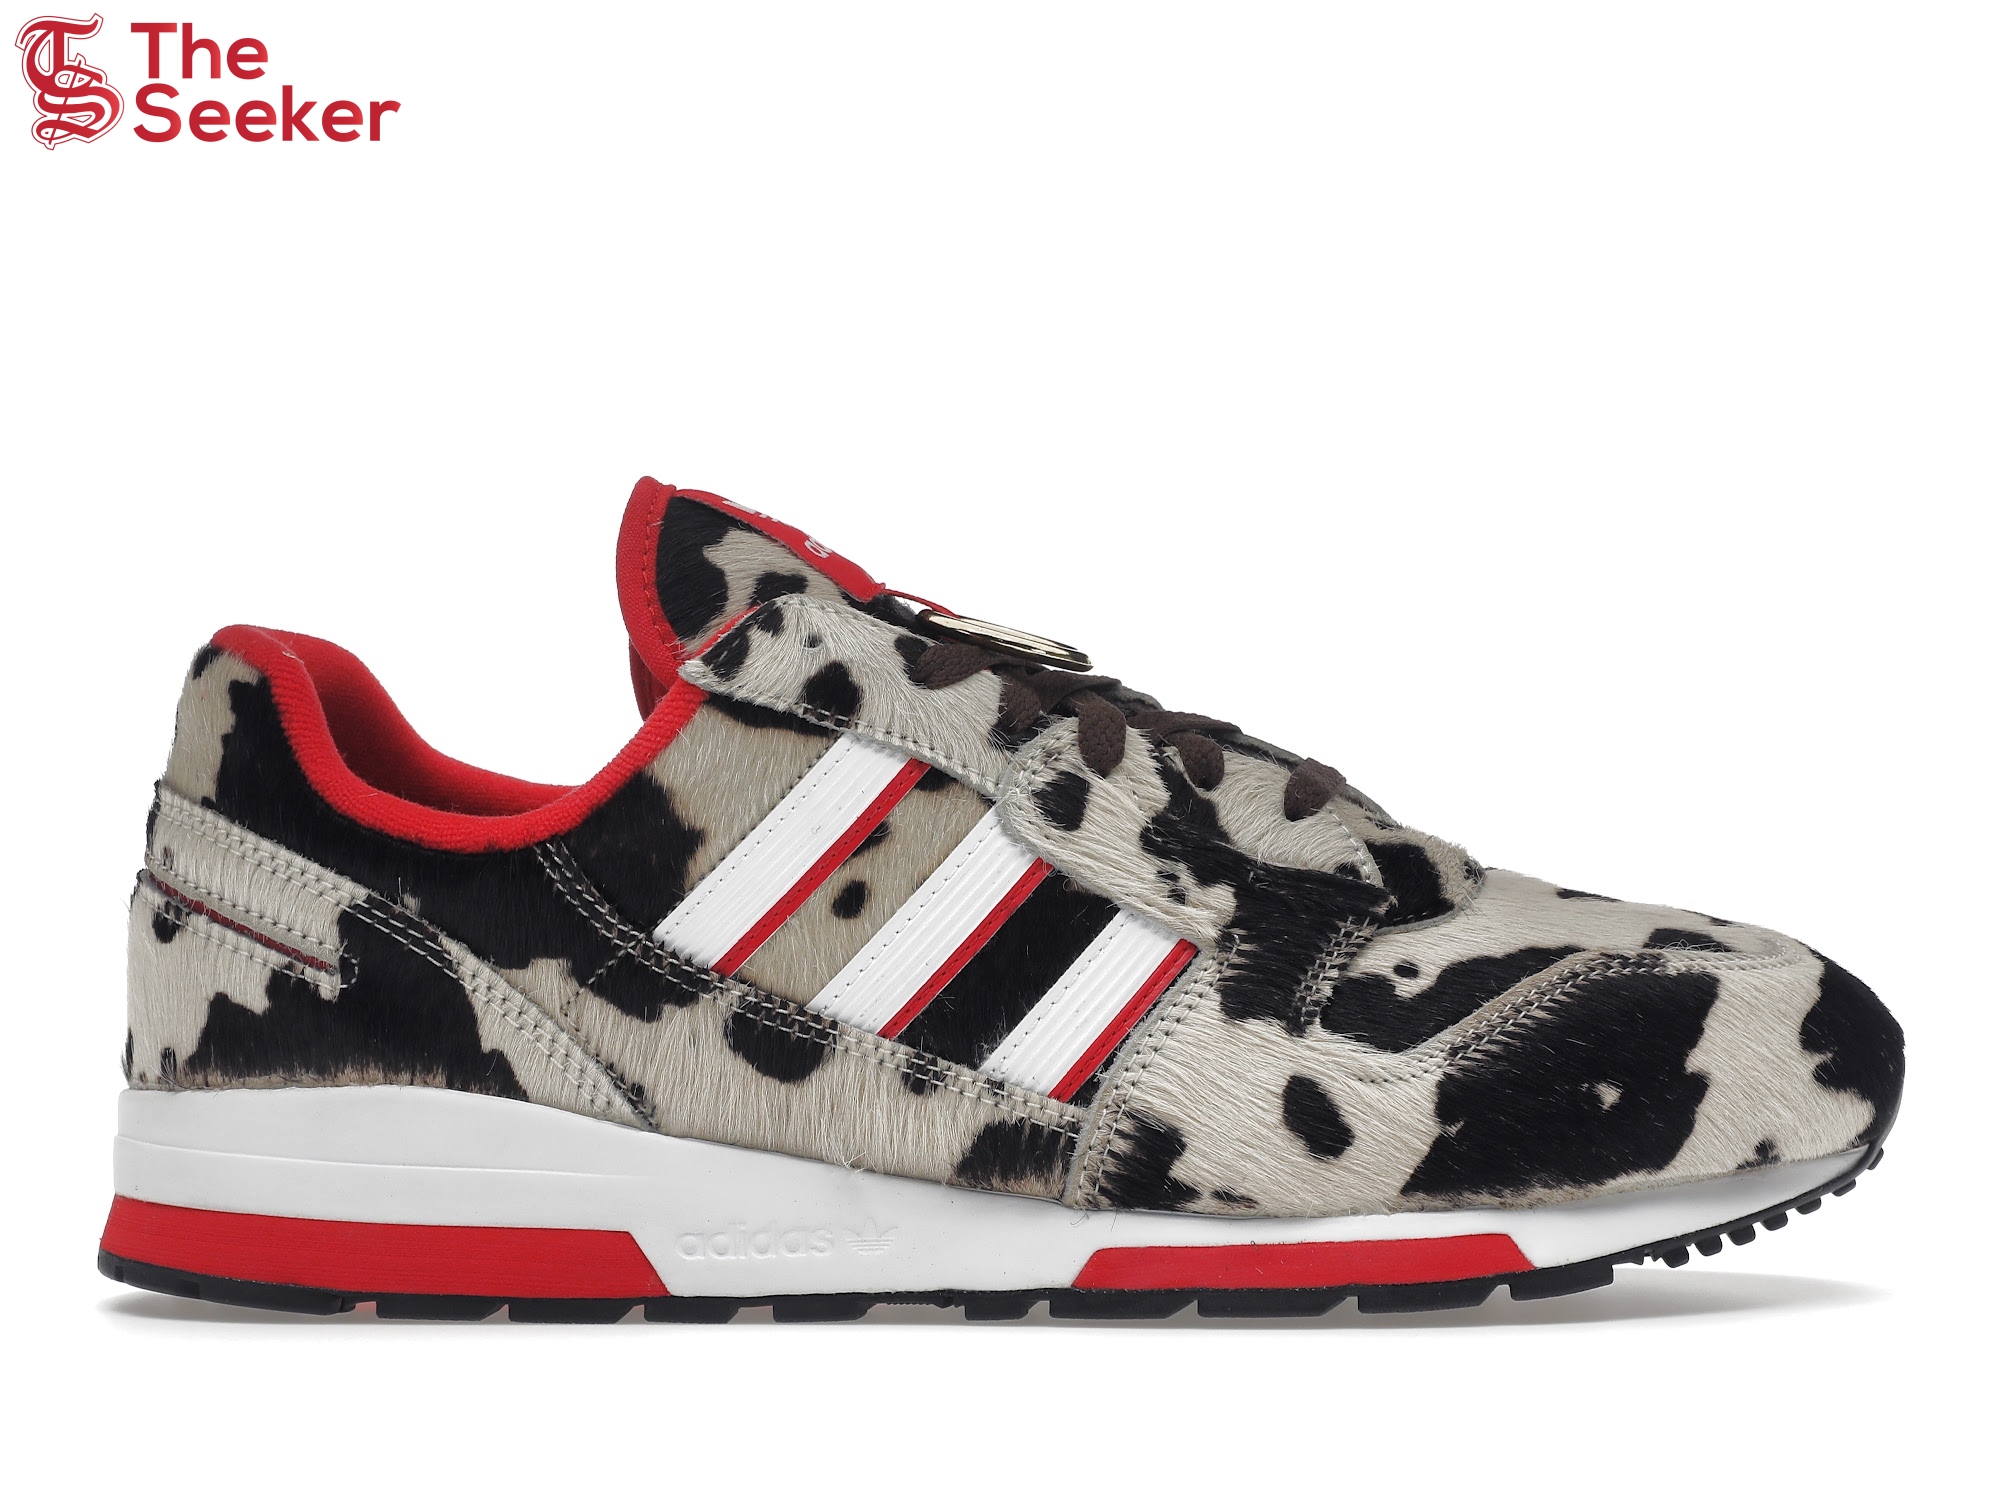 adidas ZX 420 Cow